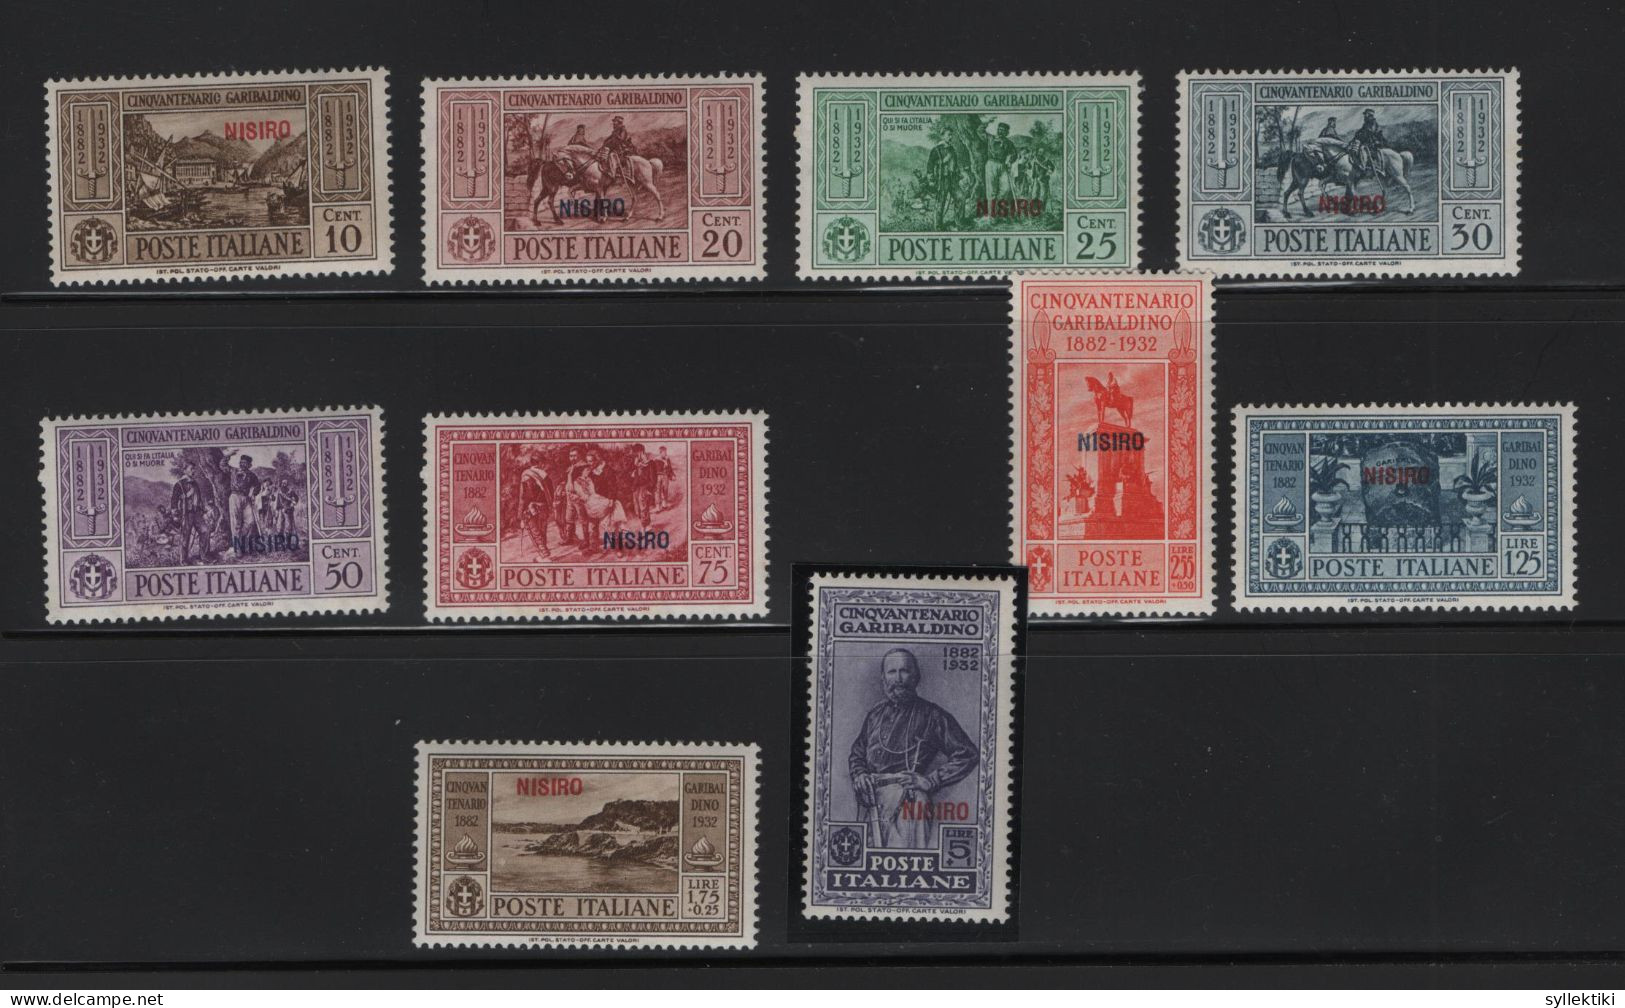 GREECE 1932 DODECANESE GARIBALDI ISSUE NISIRO OVERPRINT COMPLETE SET MNH STAMPS   HELLAS No 108X - 117X AND VALUE EURO - Dodecanese